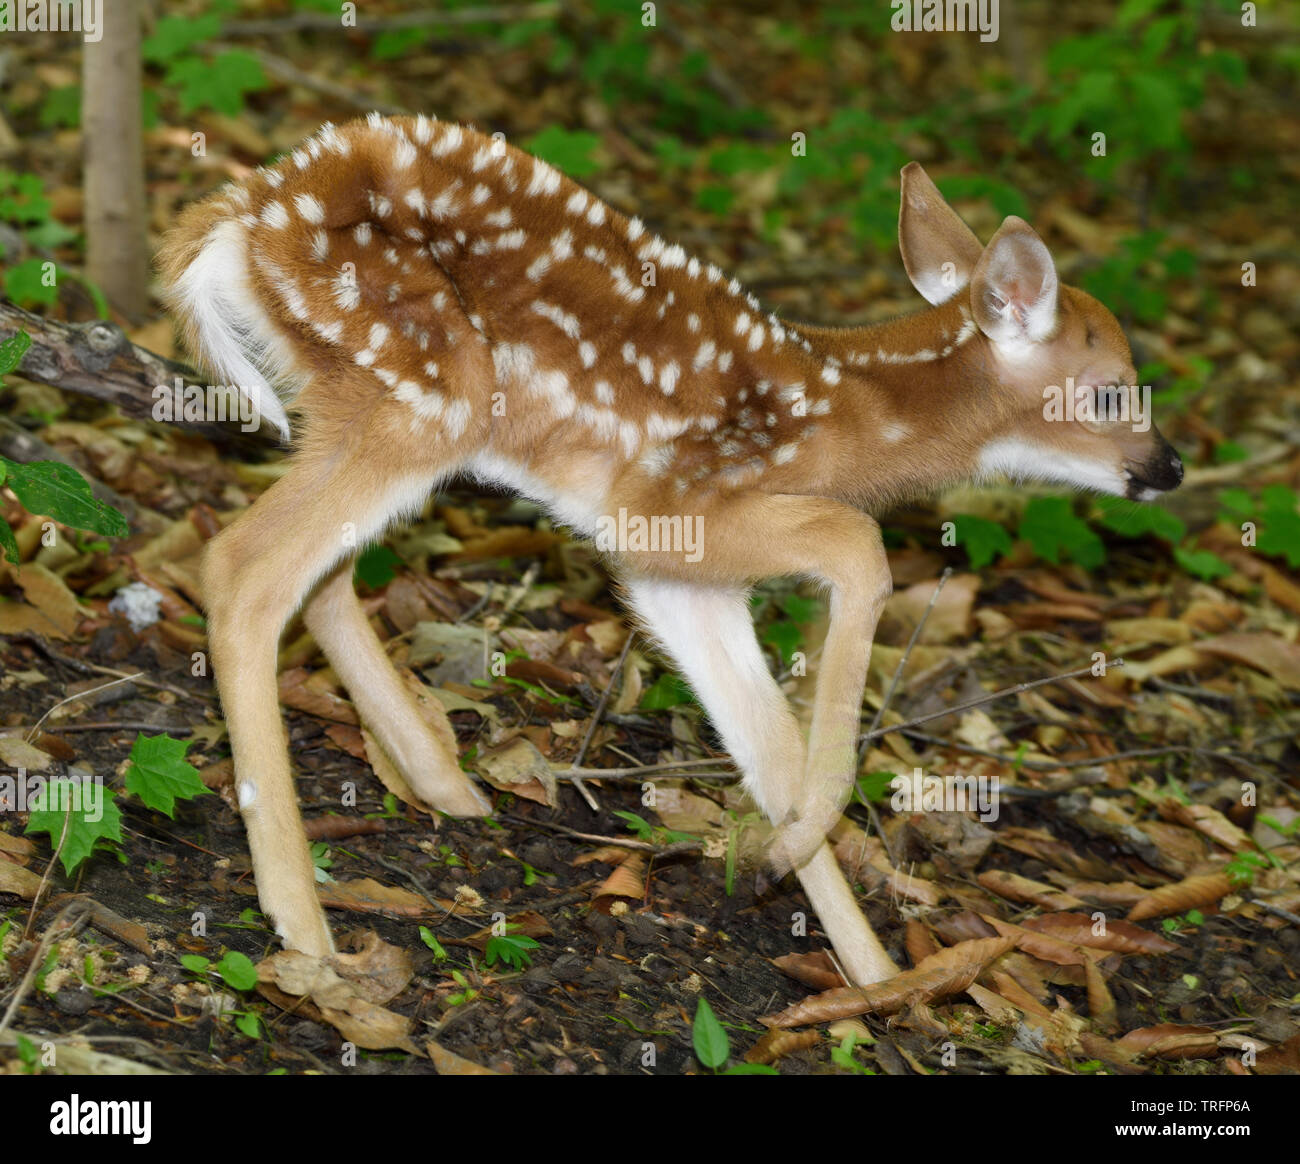 Day old white tailed deer fawn with spots and unsteady legs wobbling away in a forest Toronto Stock Photo